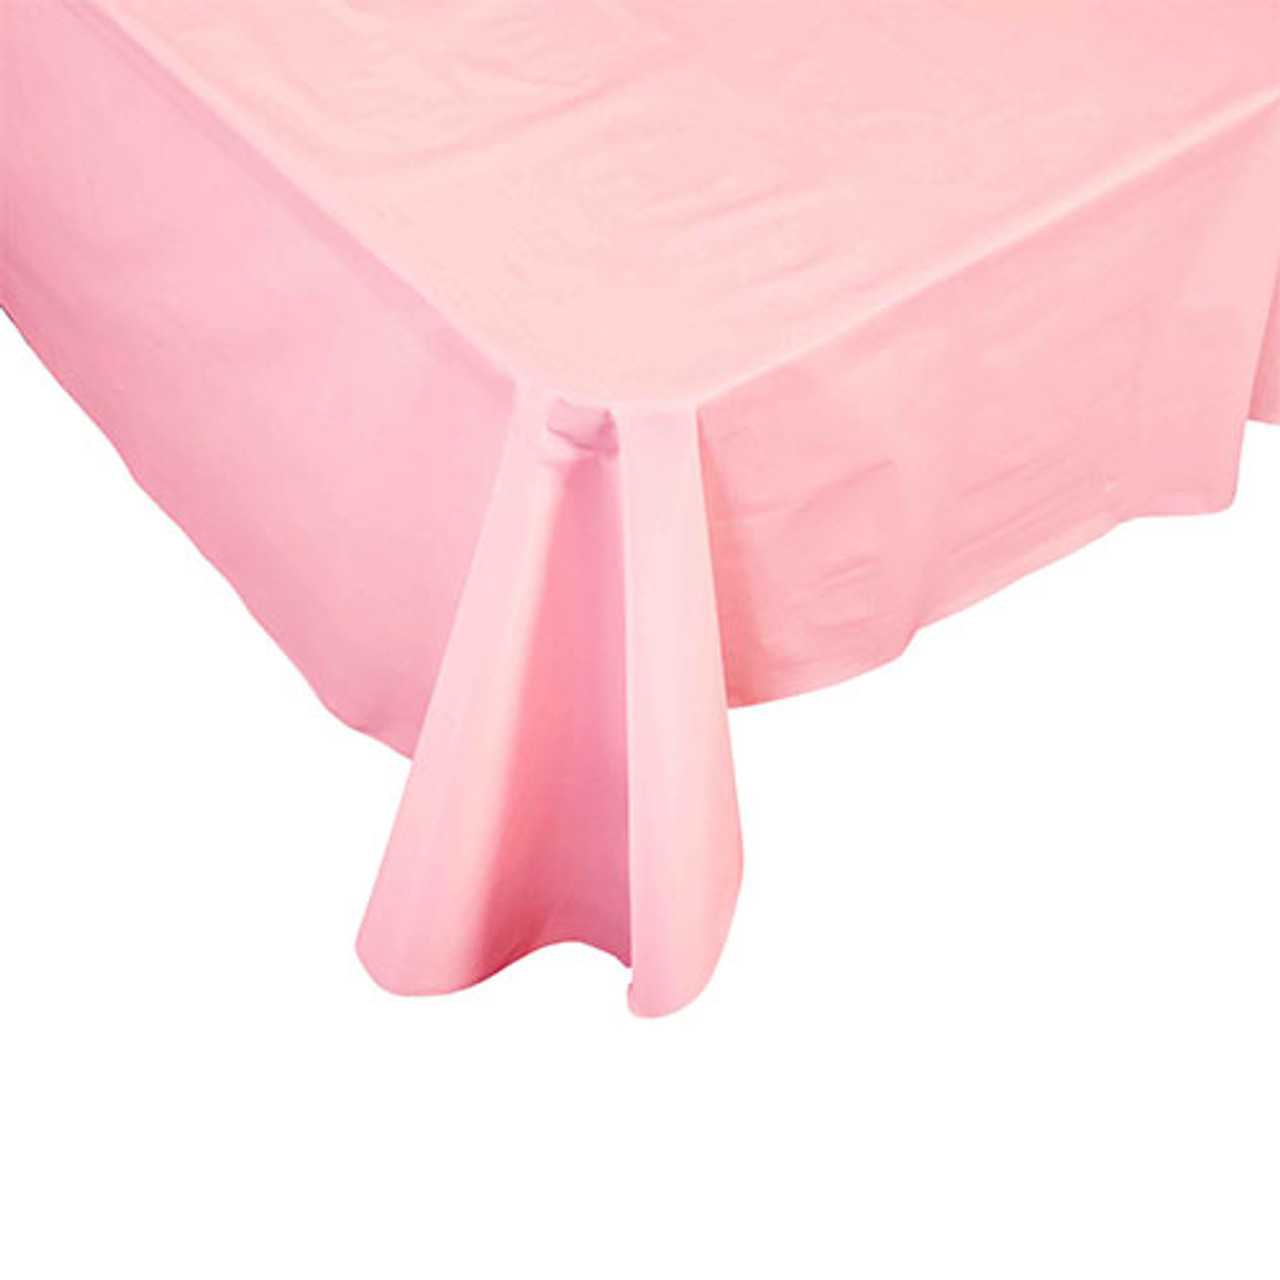 Light Blue Plastic Table Cover Roll 30m